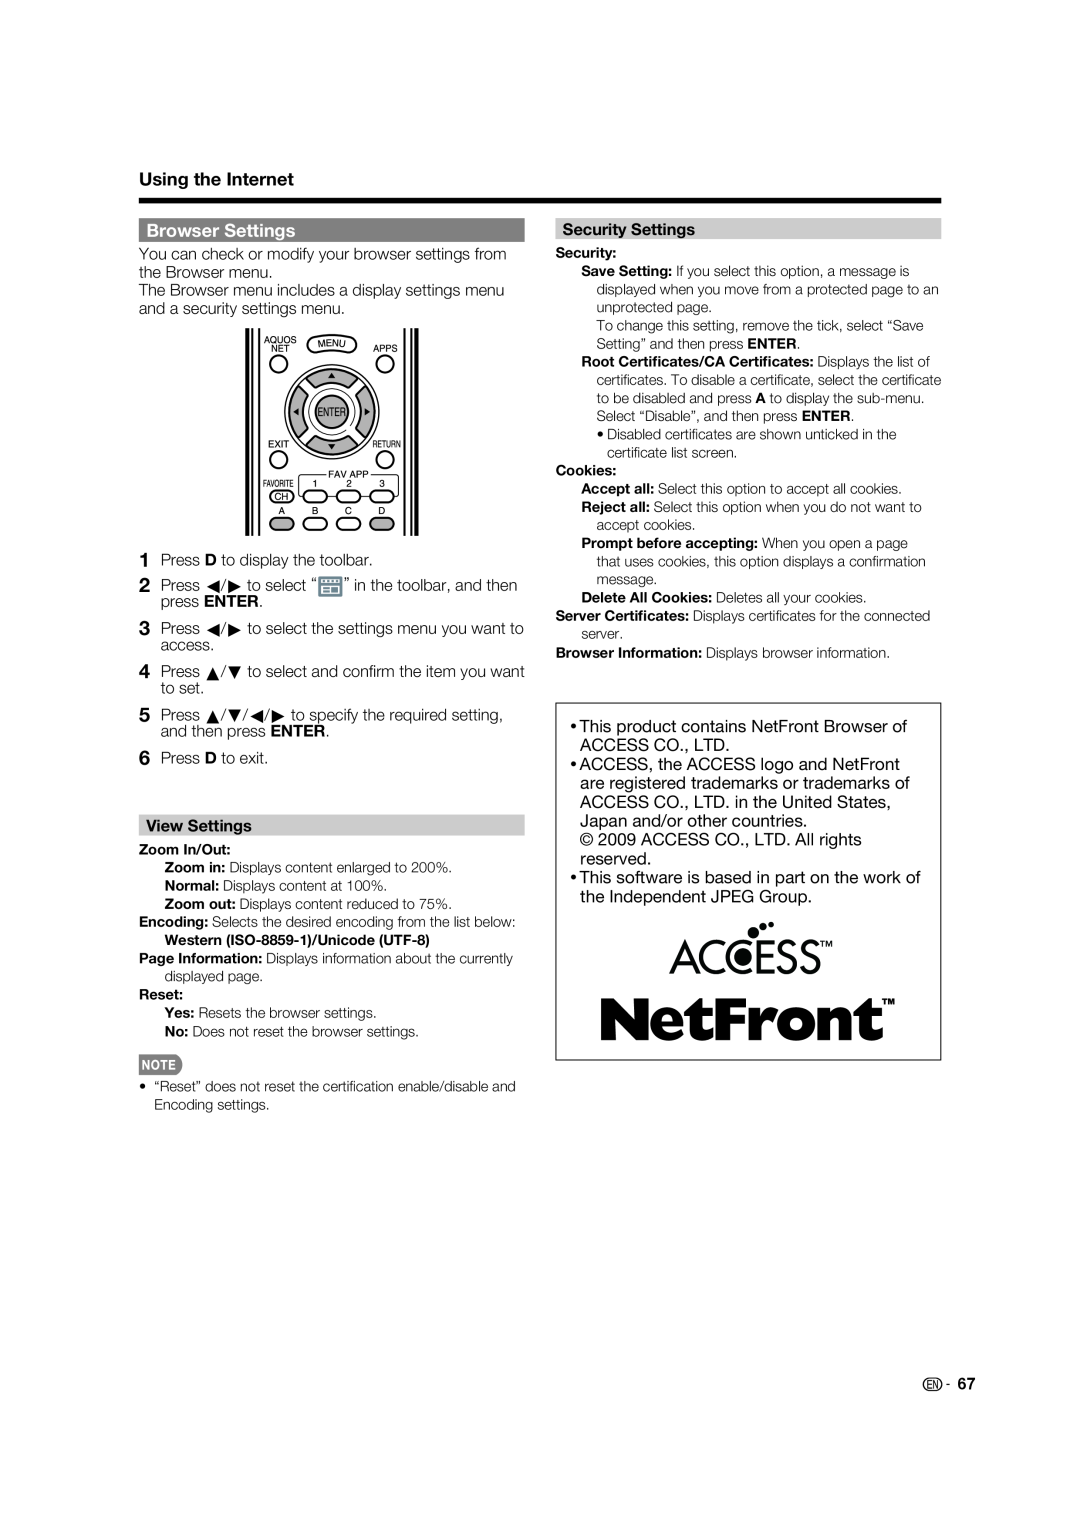 Sharp LC-70LE734U operation manual Browser Settings, Security Settings, View Settings, Using the Internet 